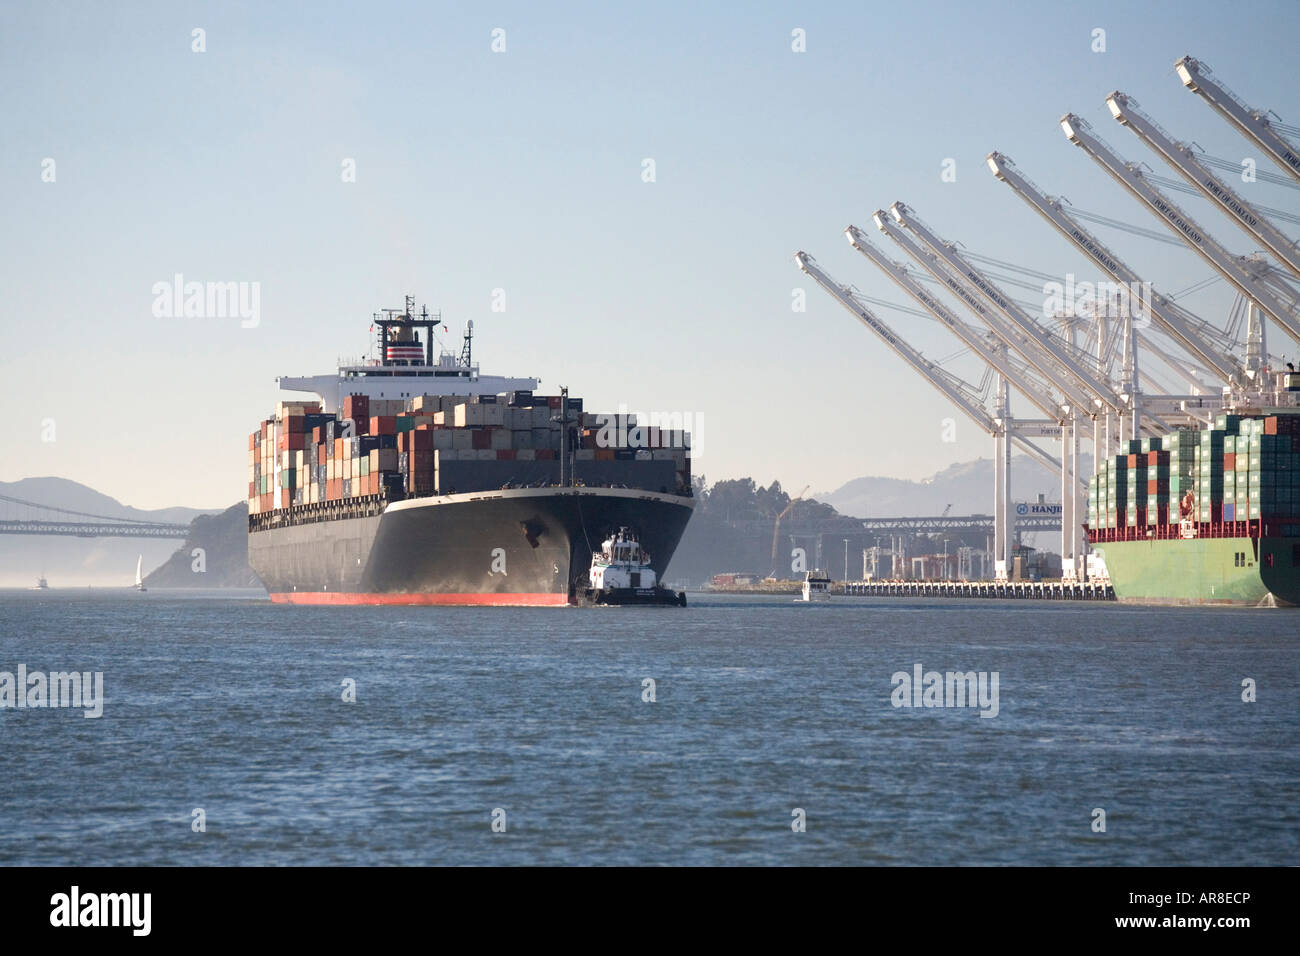 Wider view of ship entering Oakland with cranes ready to offload the cargo. Stock Photo